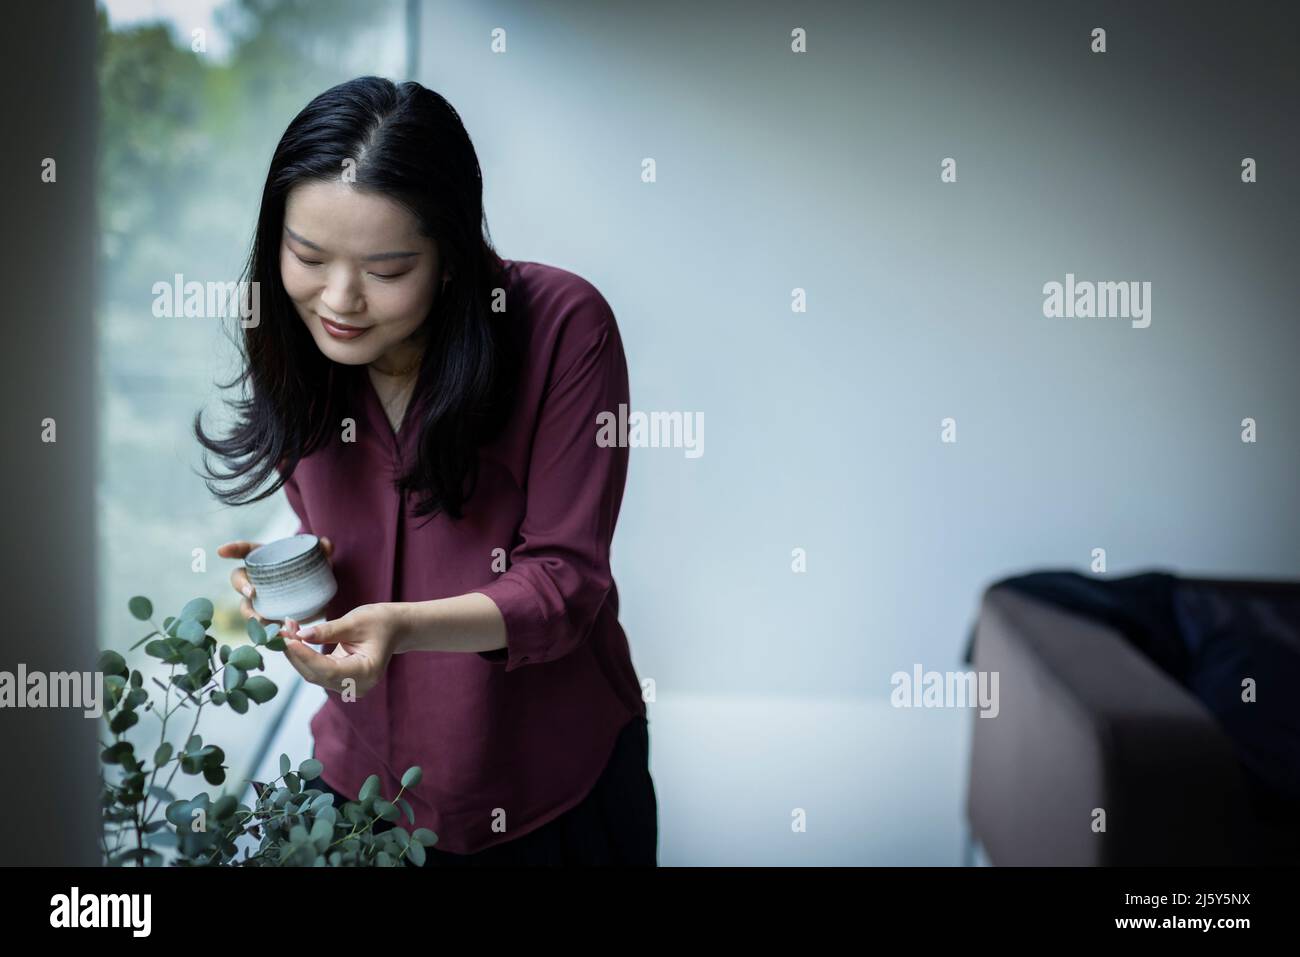 Young woman inspecting leaves on green houseplant at home Stock Photo